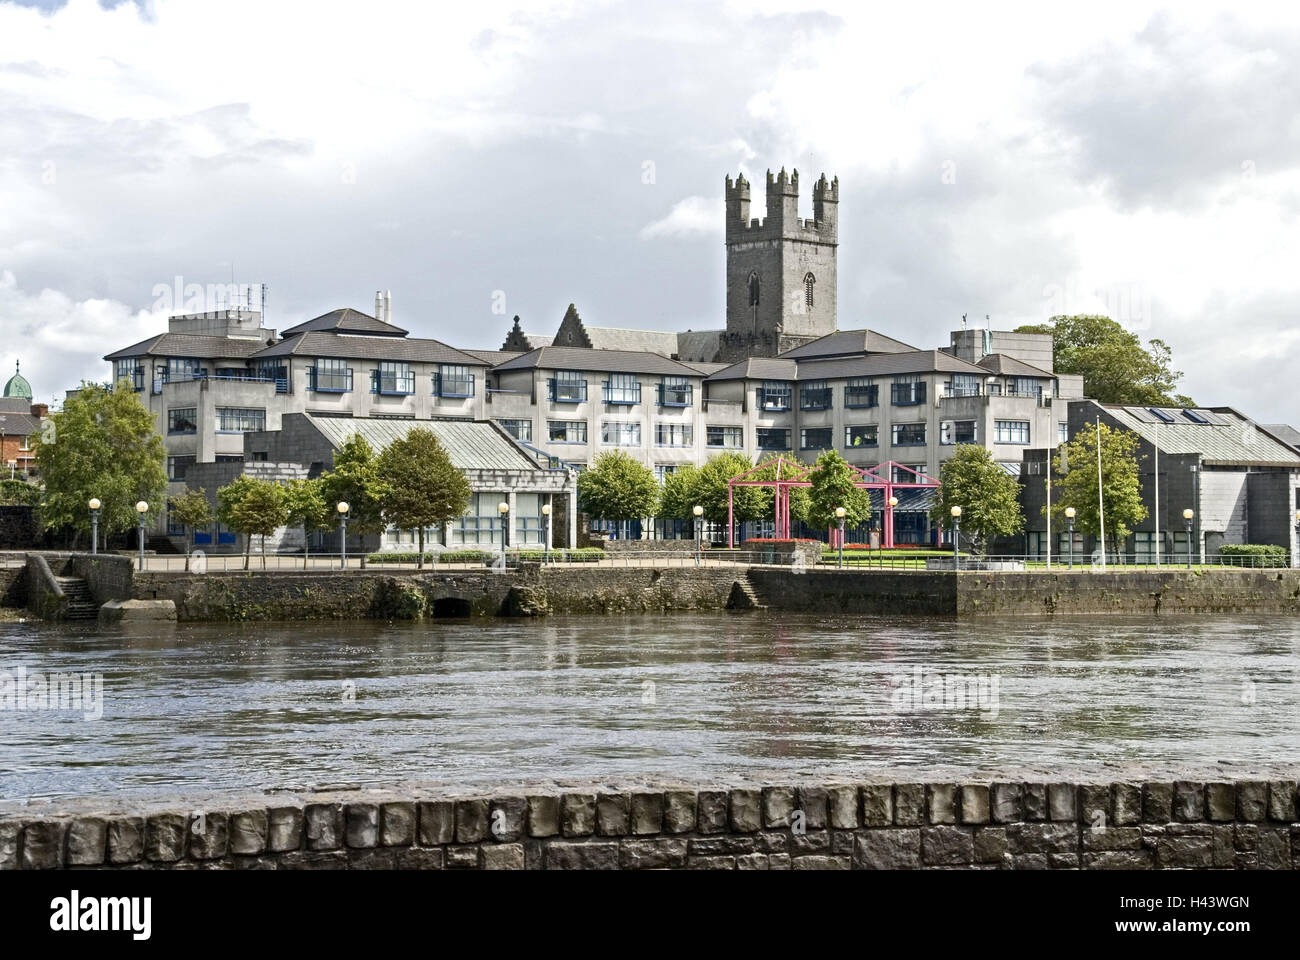 Ireland, Munster, limerick, St. Mary Ì see, Cathedral, River Shannon, destination, town, town view, building, architecture, river, church, cathedral, steeple, tower, riverside, trees, Stock Photo